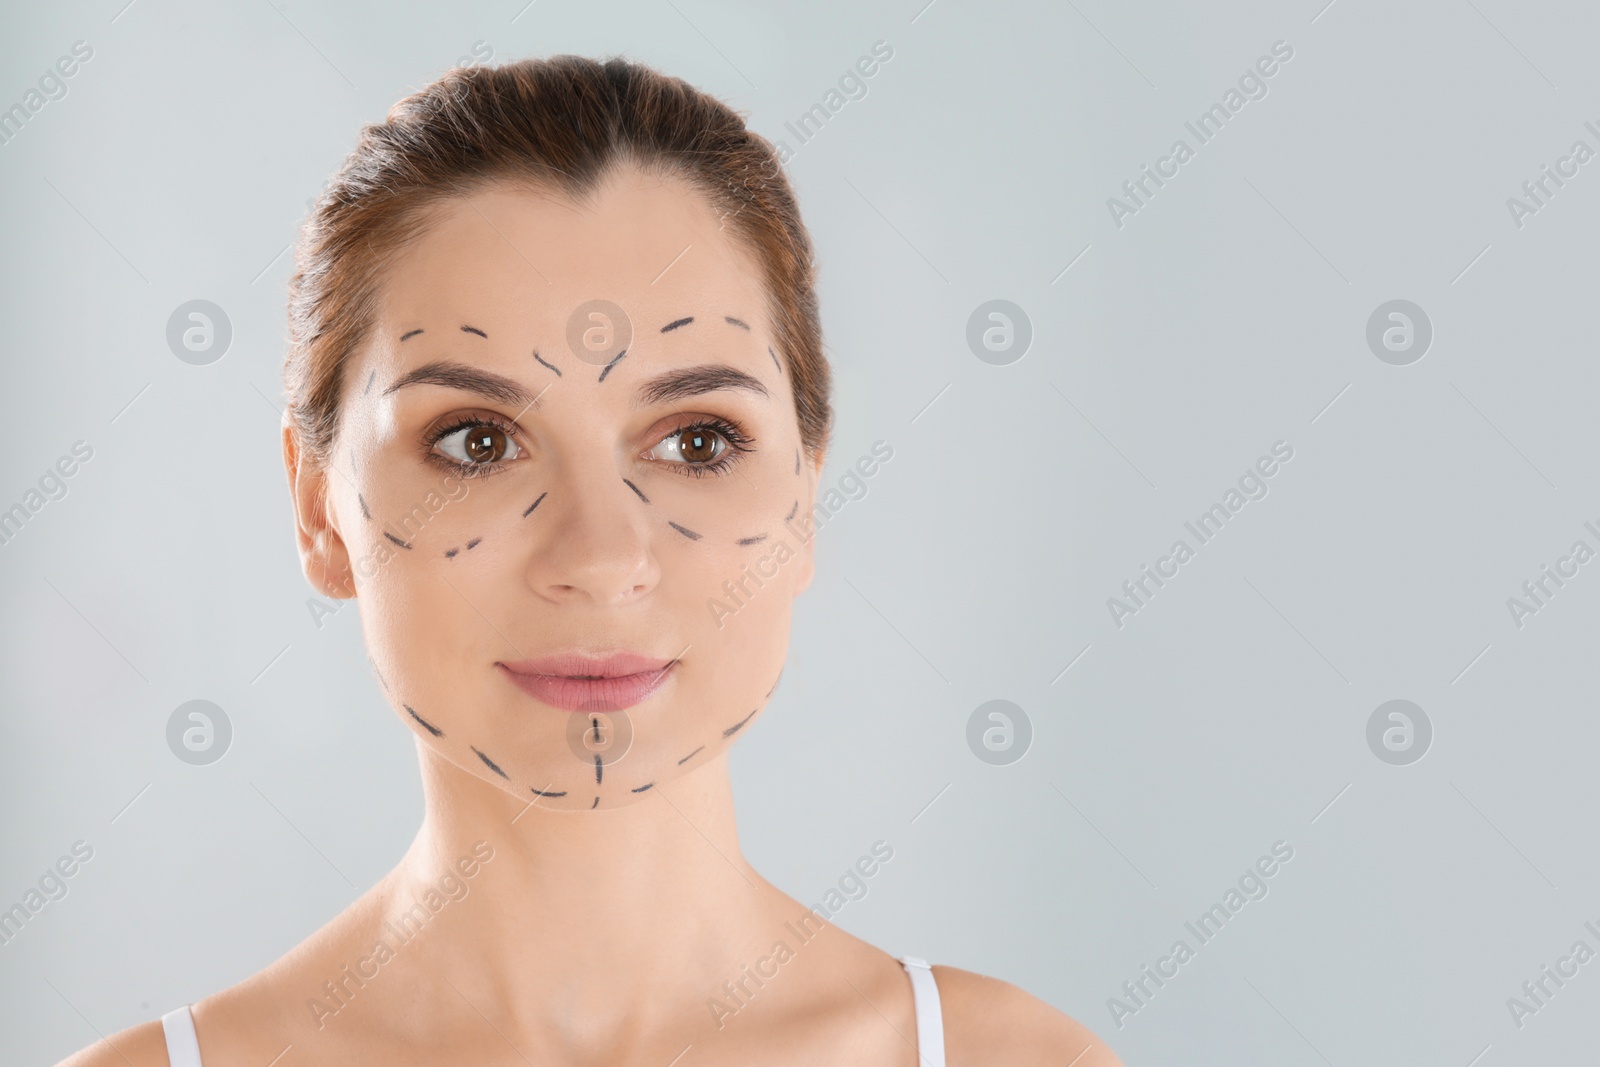 Photo of Portrait of woman with marks on face against grey background, space for text. Cosmetic surgery